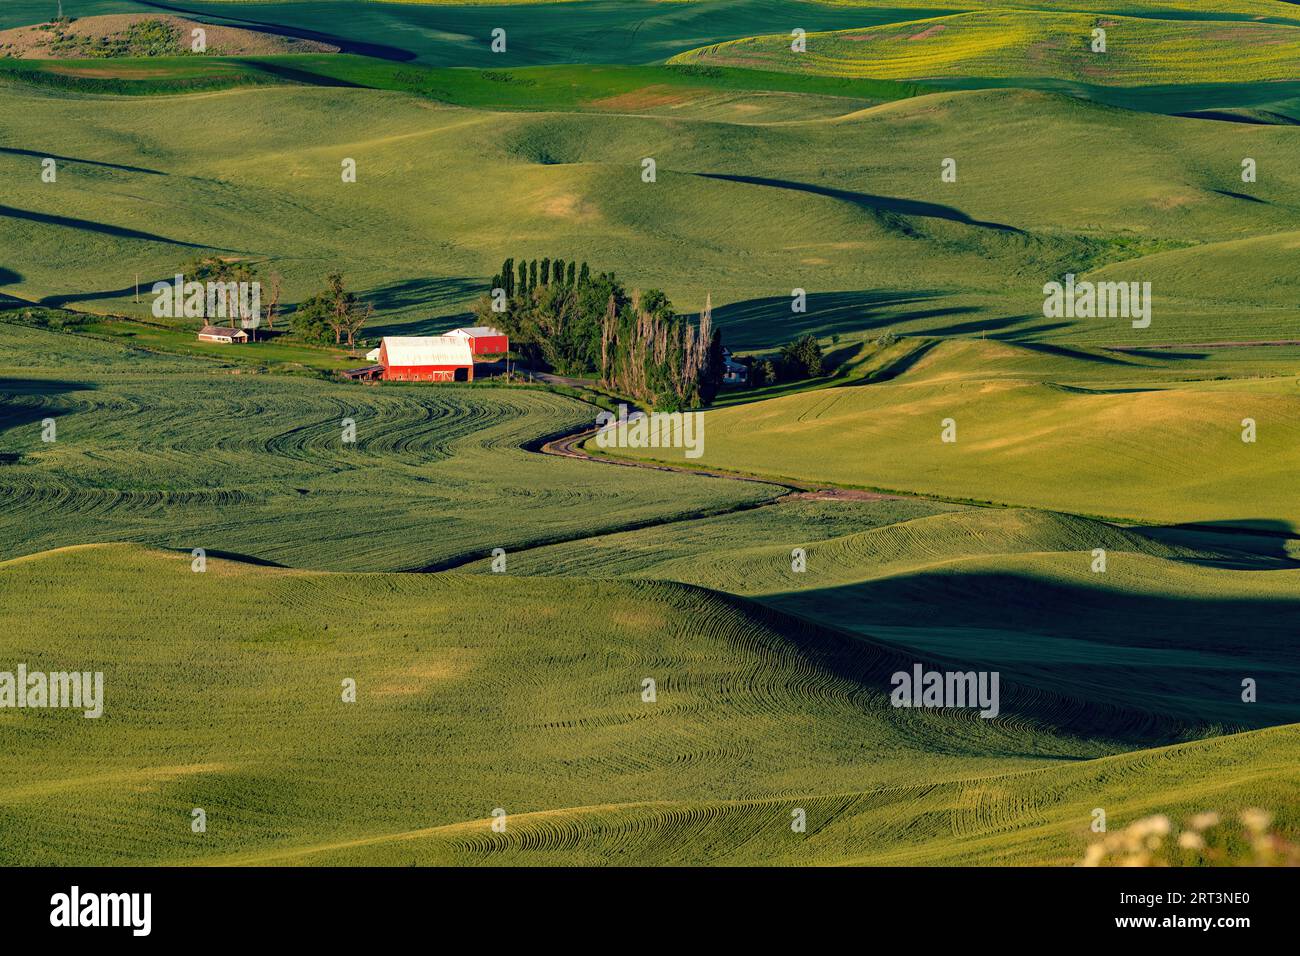 Sunlight and shadows play on the rolling hills of the Palouse Stock Photo